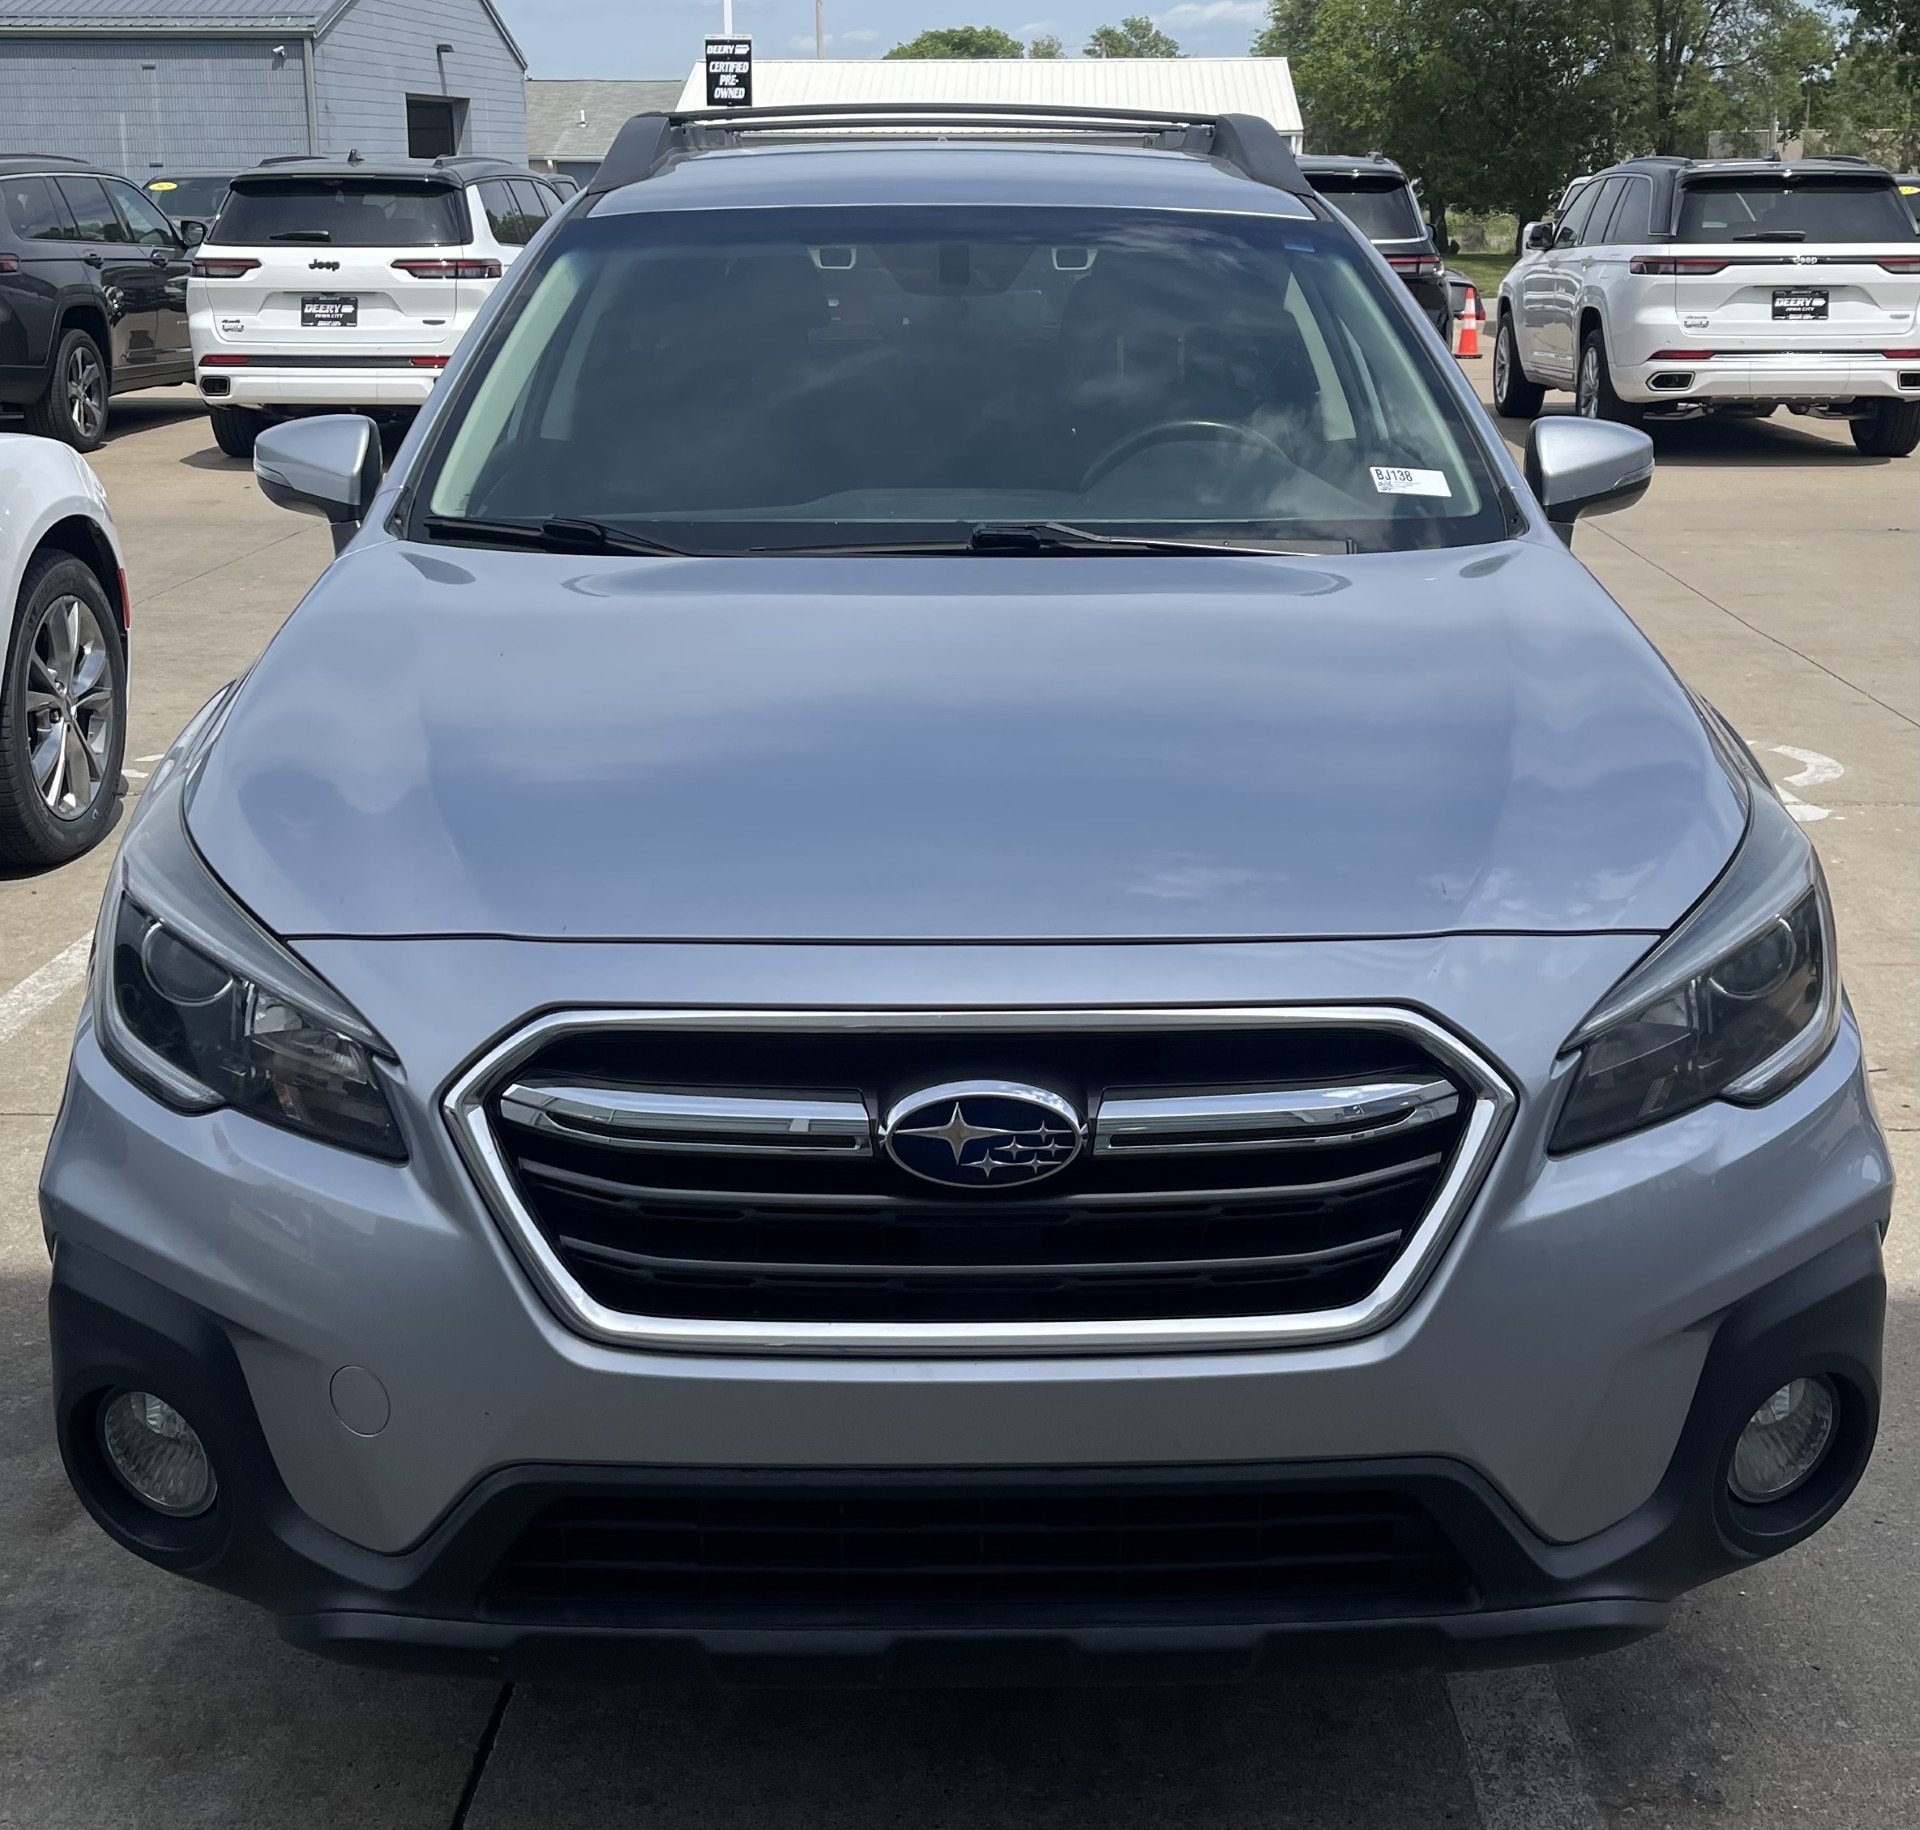 Used 2019 Subaru Outback Premium with VIN 4S4BSAFC9K3318674 for sale in Iowa City, IA